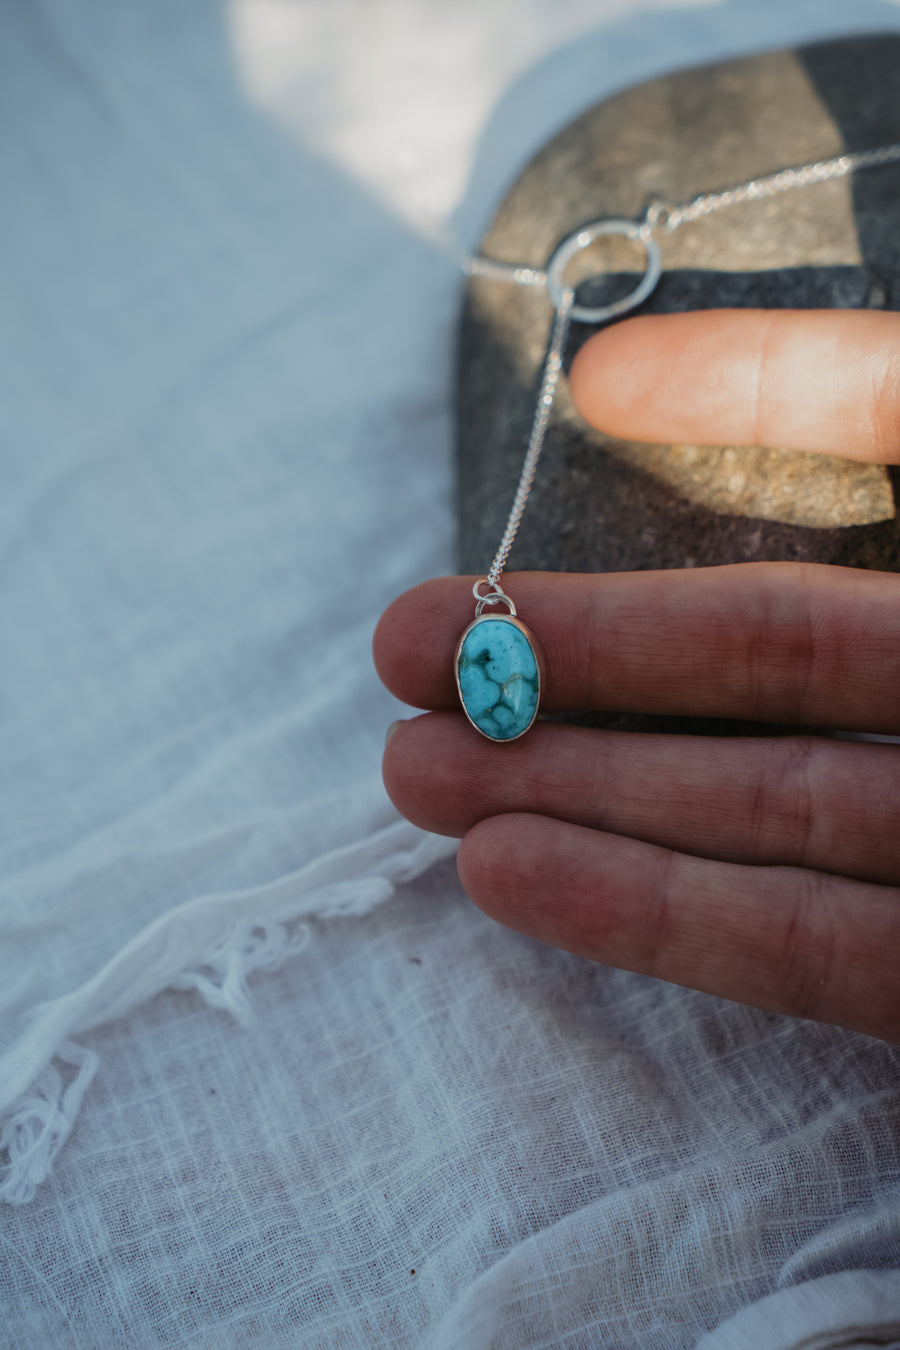 The Dainty Lariat in Turquoise Mountain